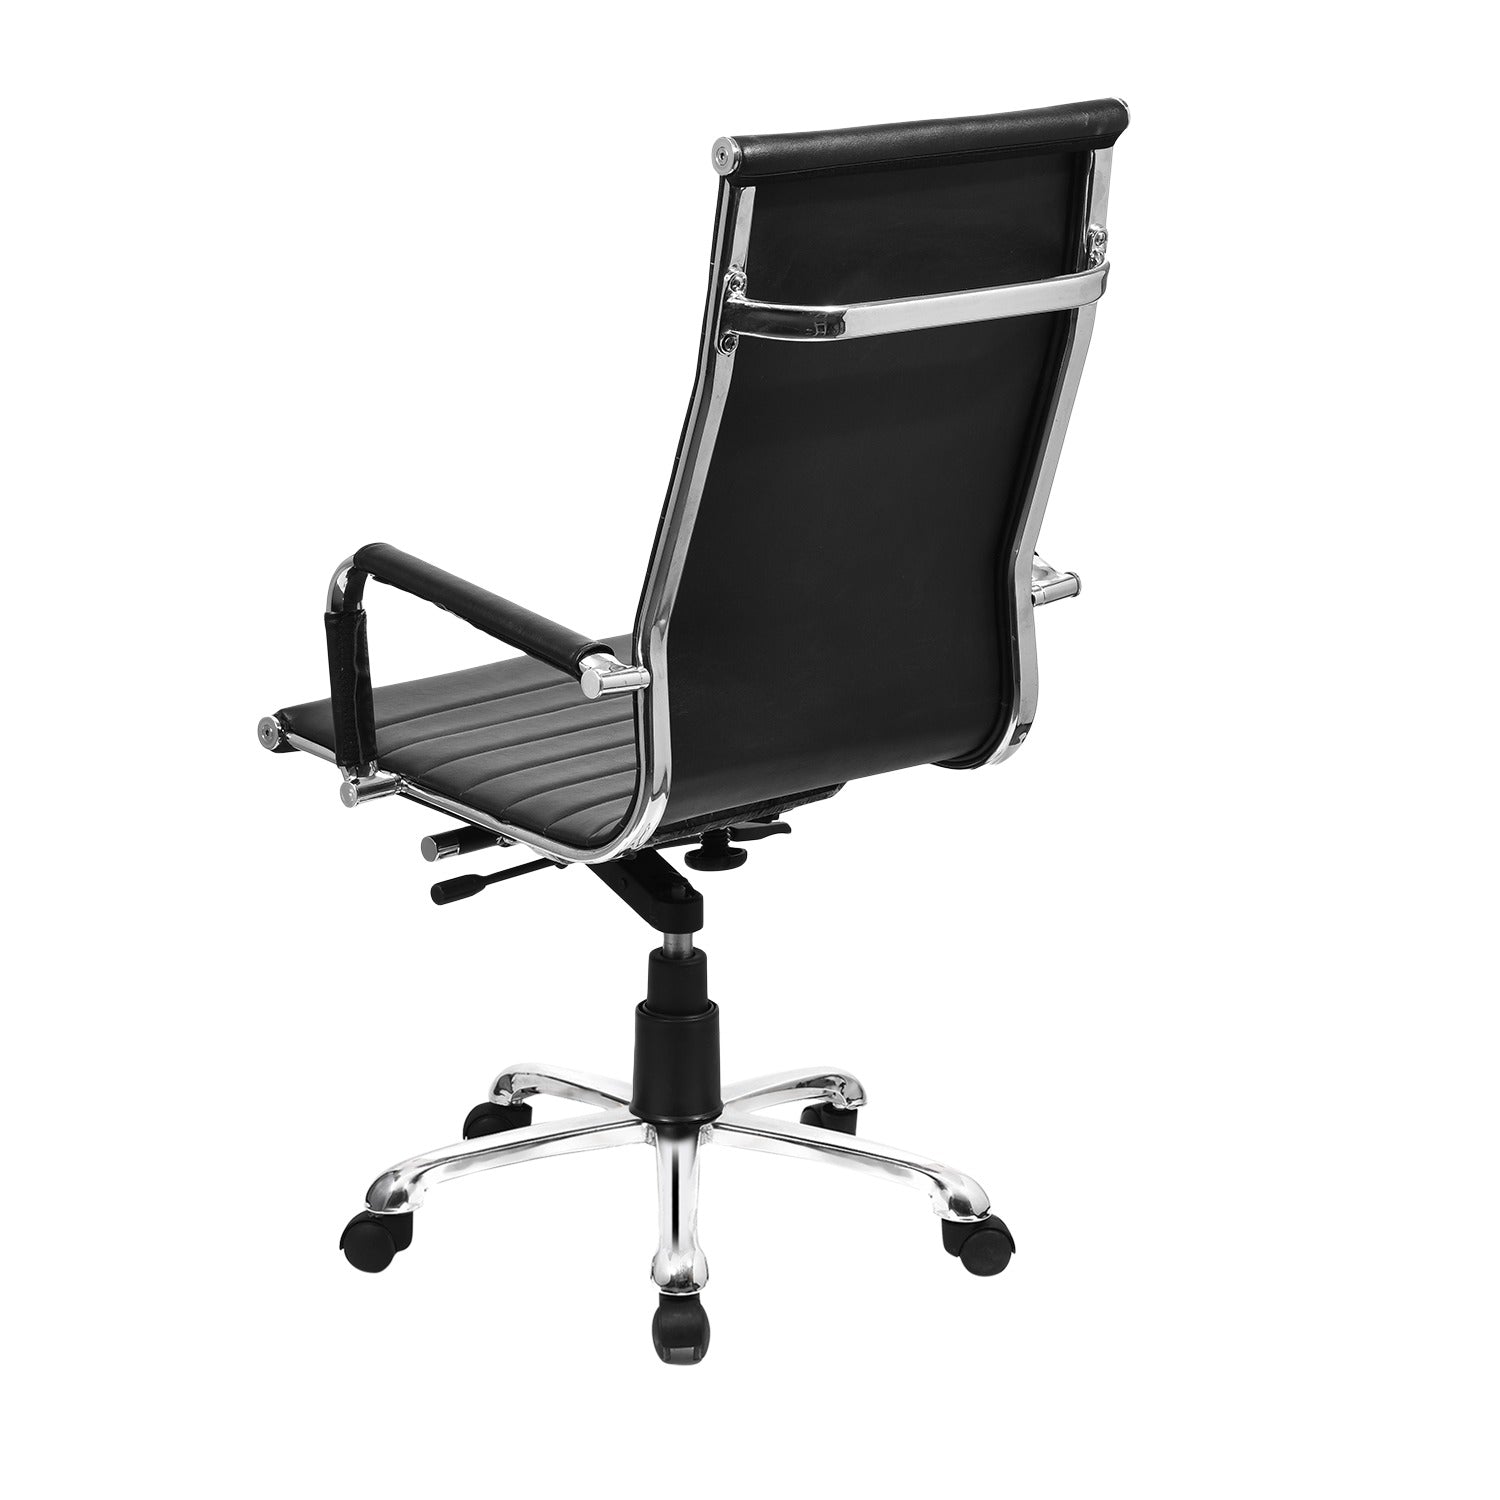 ZSE1032 High Back Chair by Zorin in Black Color Zorin